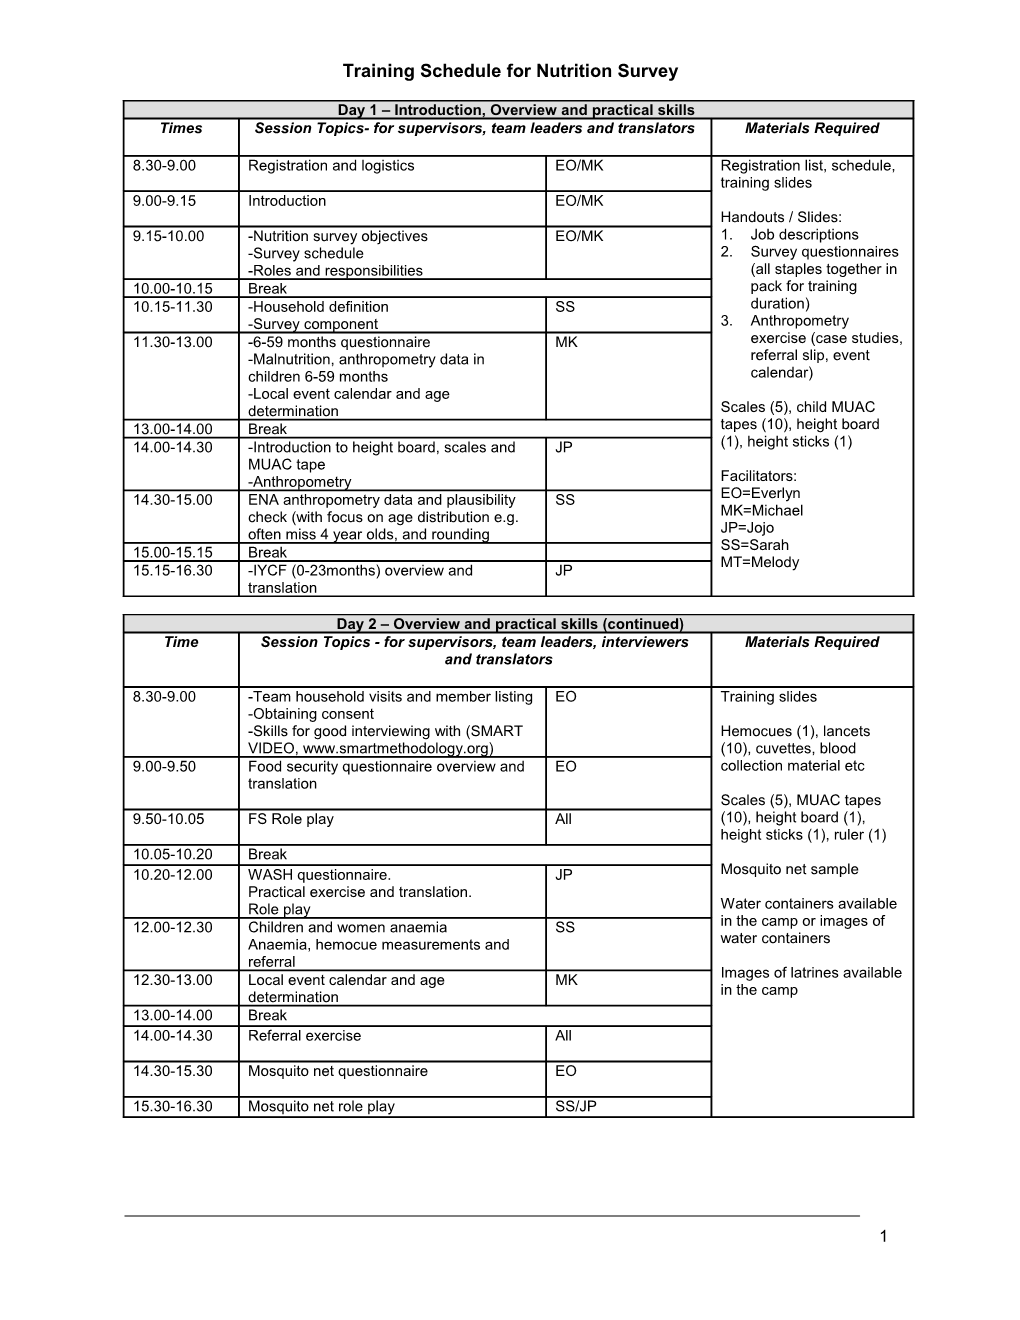 Training Schedule for the Collection of Micronutrient Data